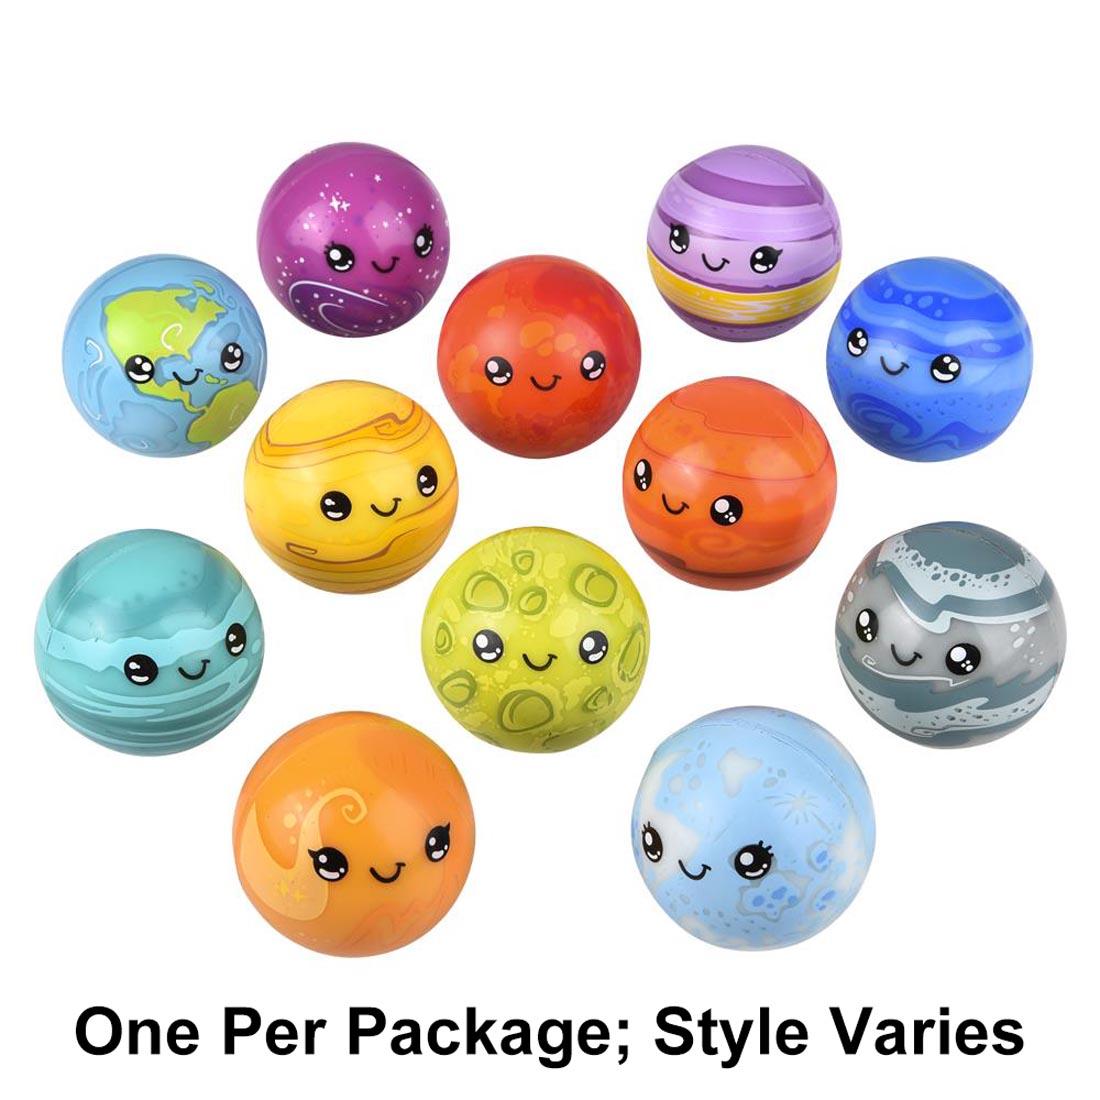 12 different Hi-Bounce Planet Balls with text One Per Package; Style Varies